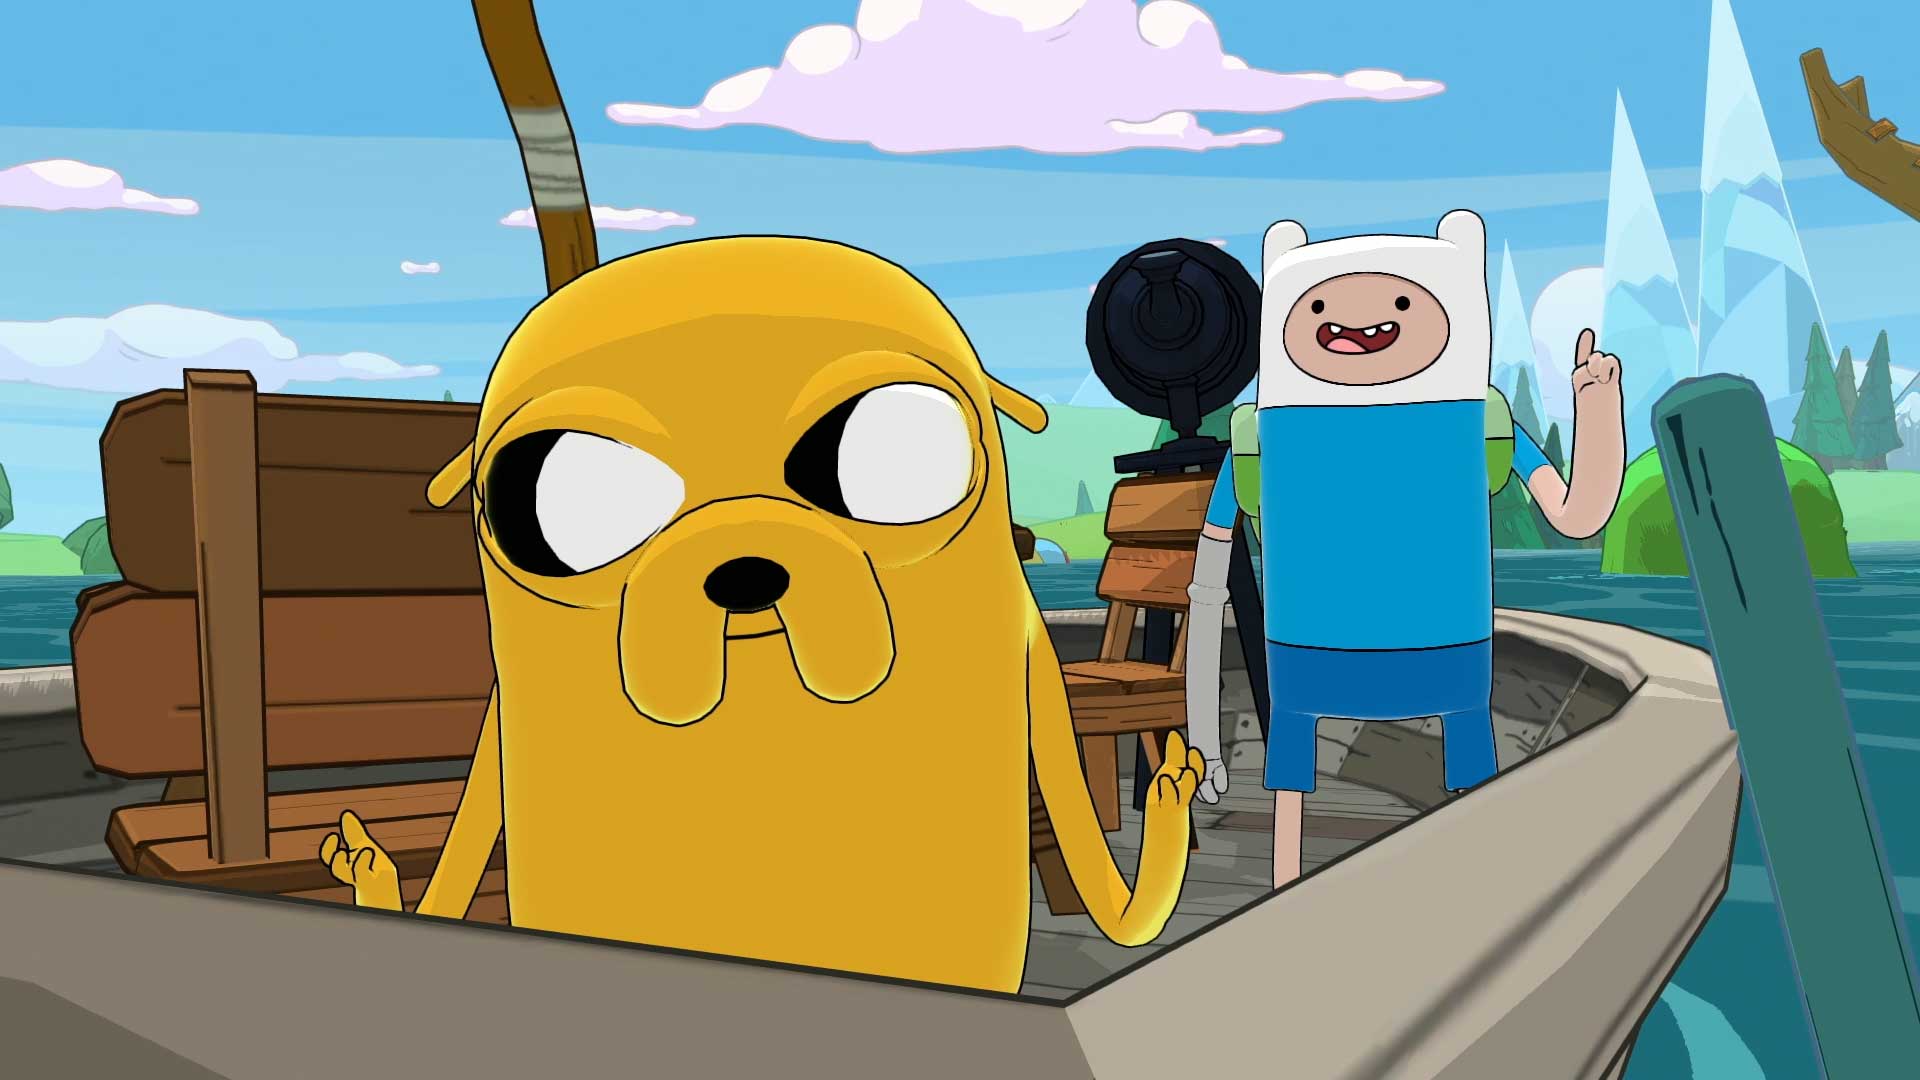 Pre Order Adventure Time: Pirates Of The Enchiridion And Save $8